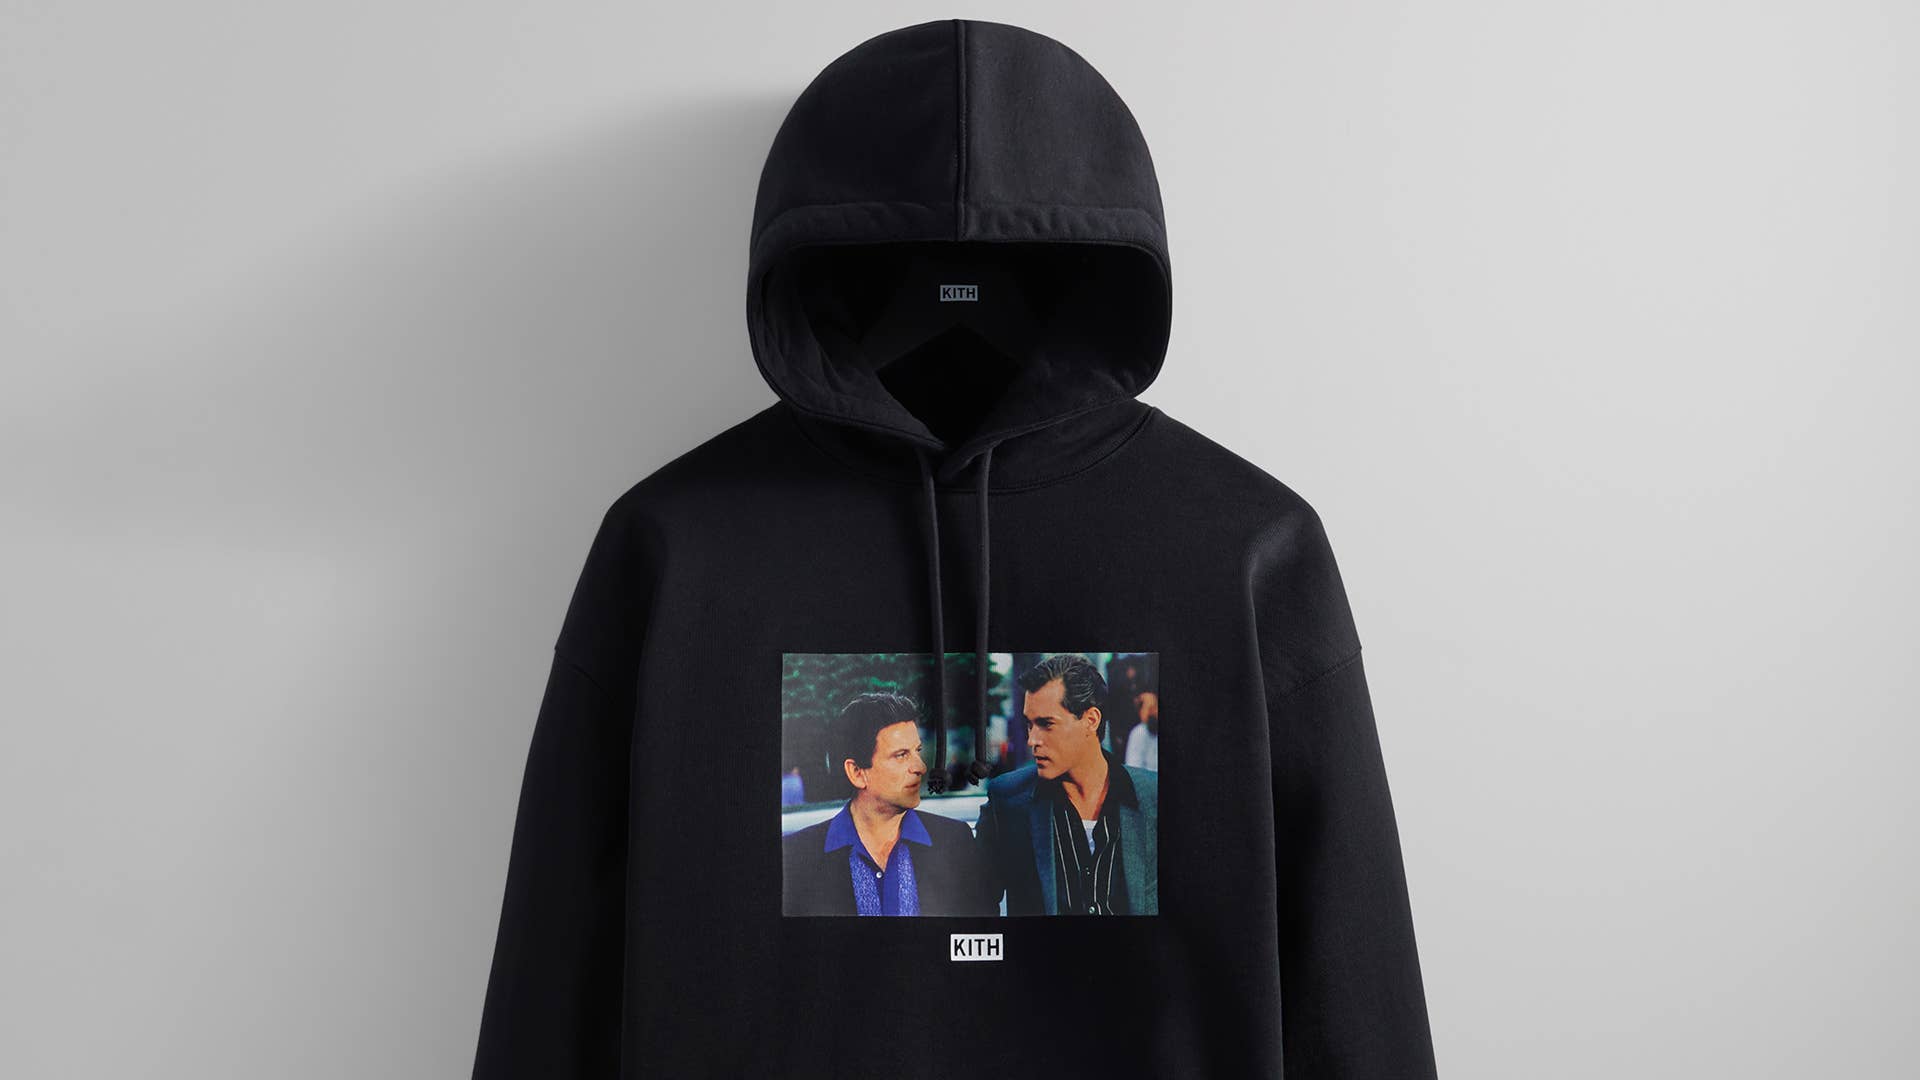 KITH and Goodfellas collaboration hoodie from upcoming capsule collection